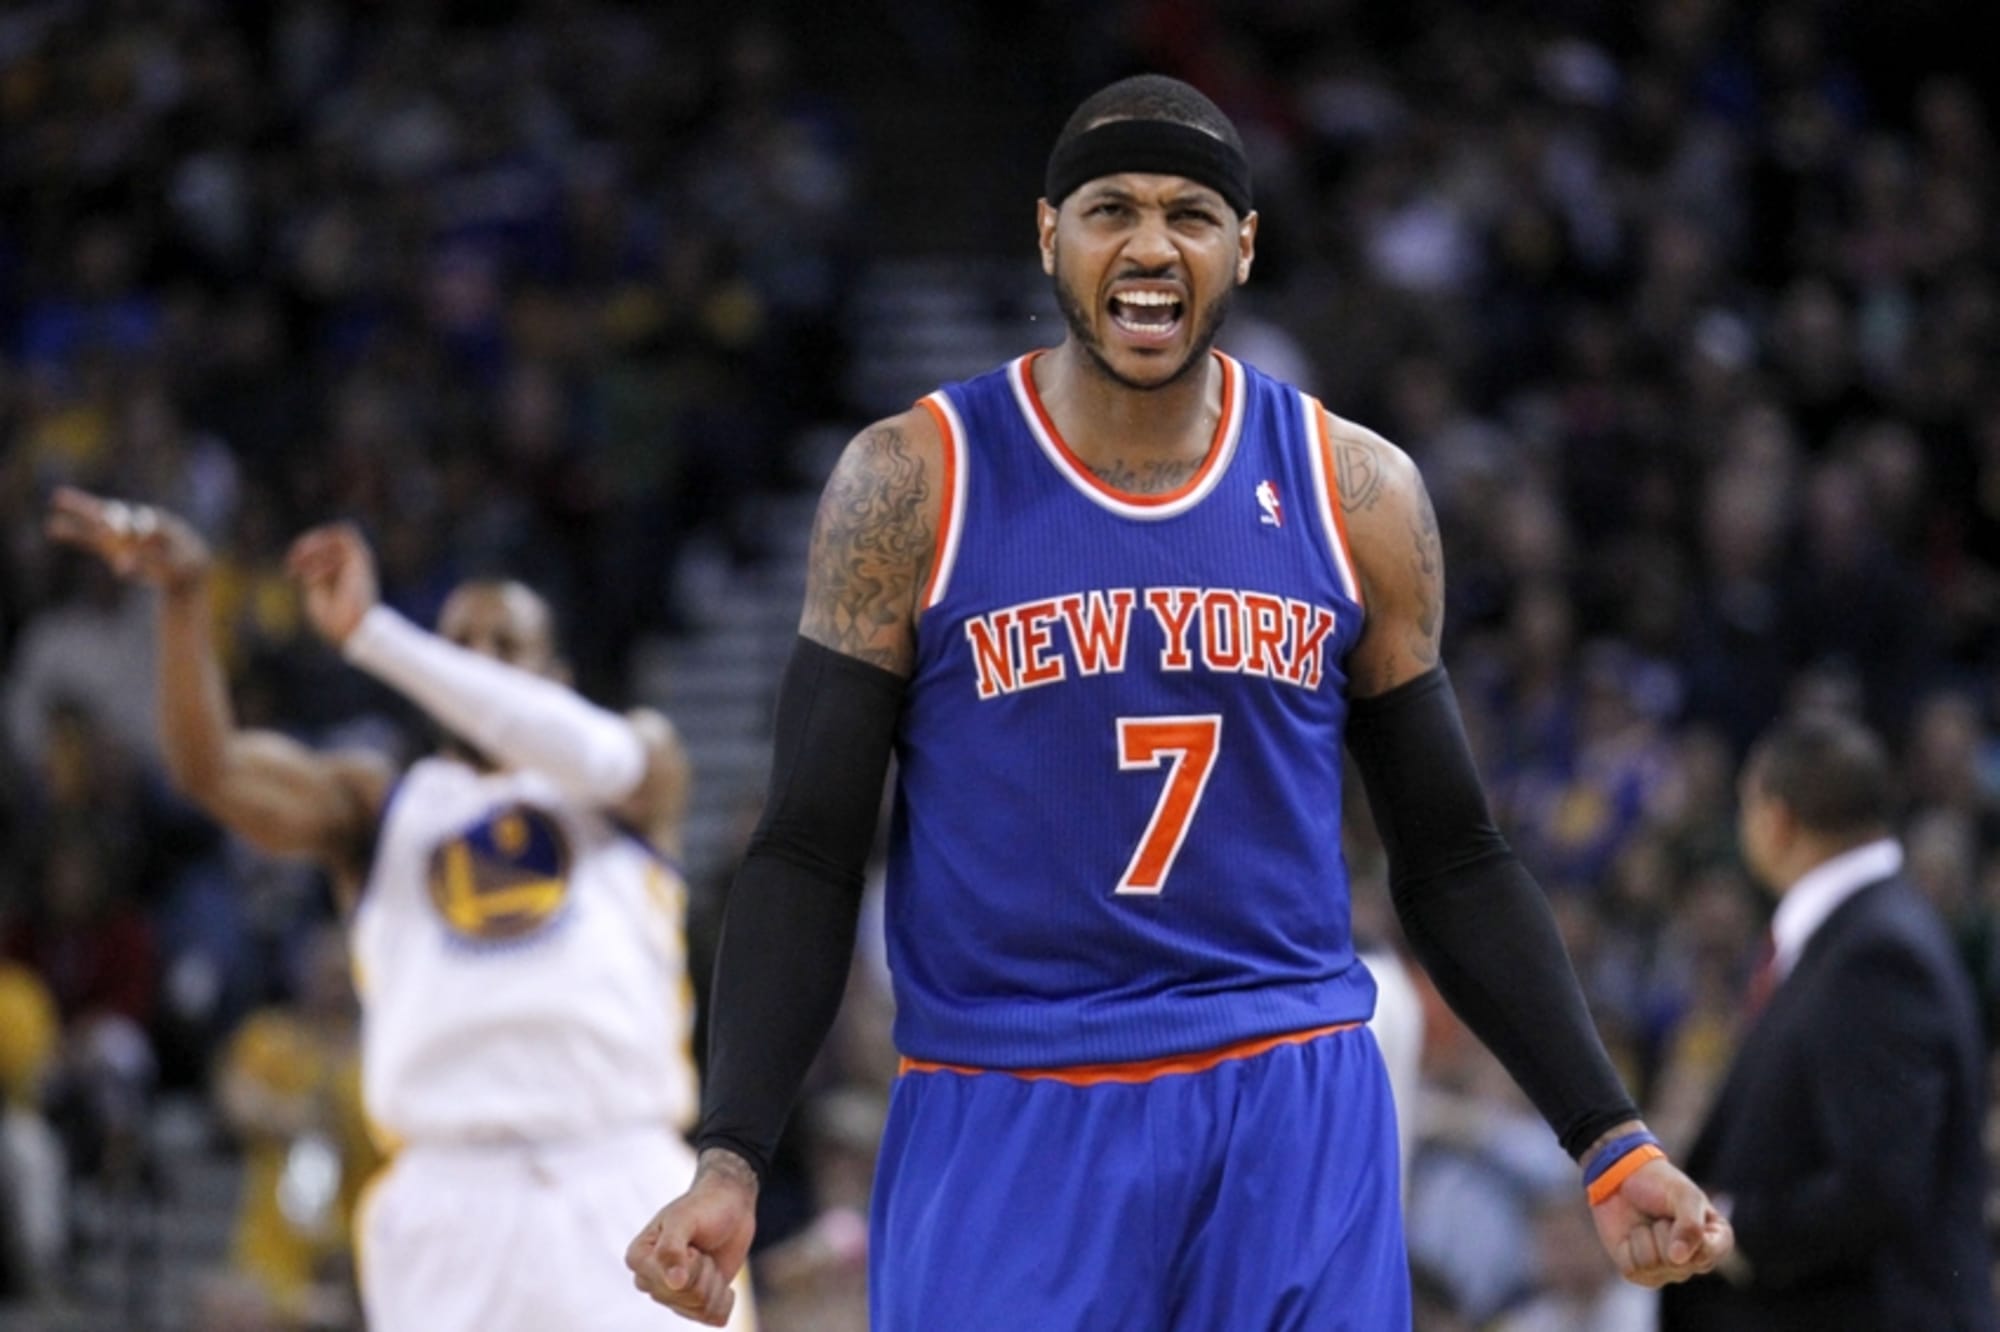 WATCH: Carmelo Anthony practices in Lakers gear for first time